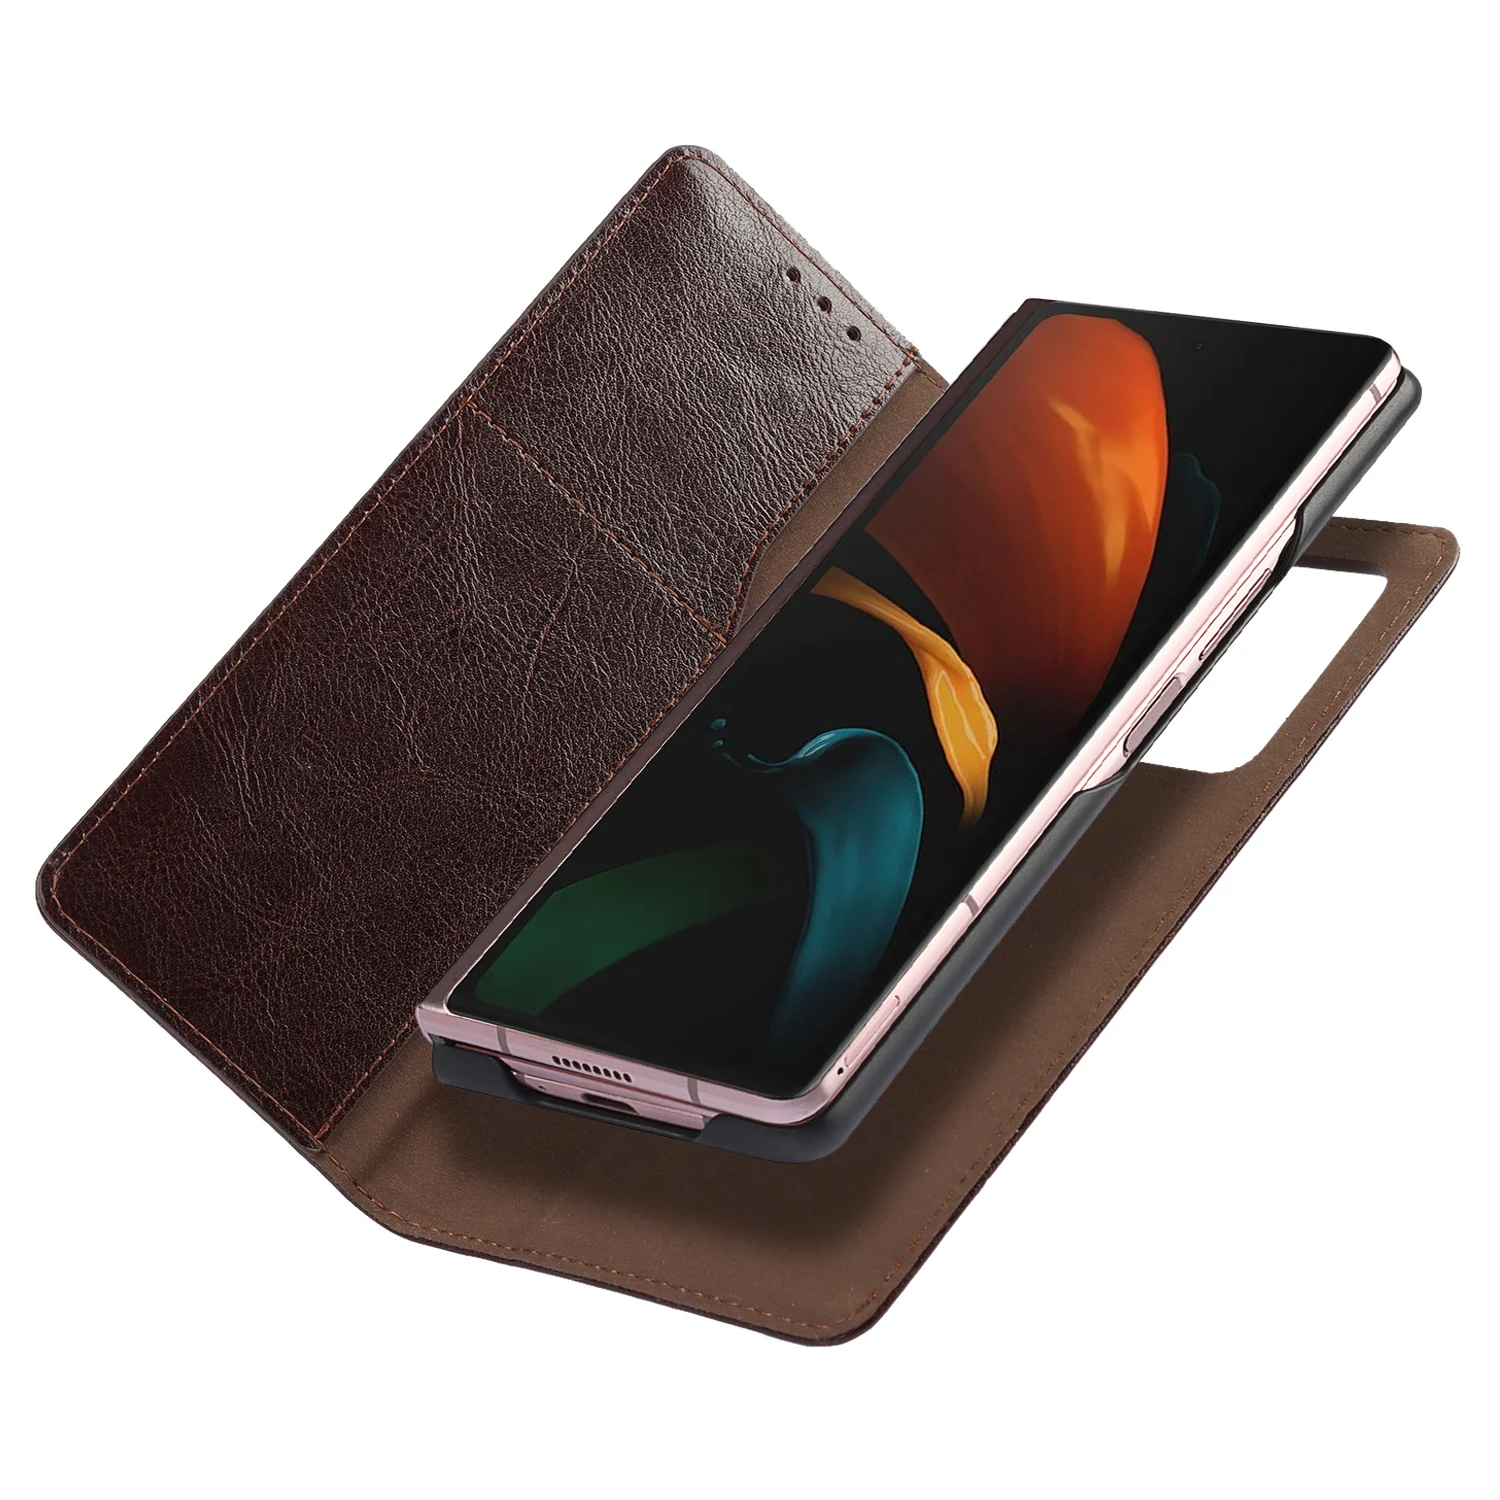 Deluxe Wallet phone case for Samsung Galaxy Z Fold 2 5G Z Fold2 5G Premium Leather detachable Case Skin Phone Bags fundas